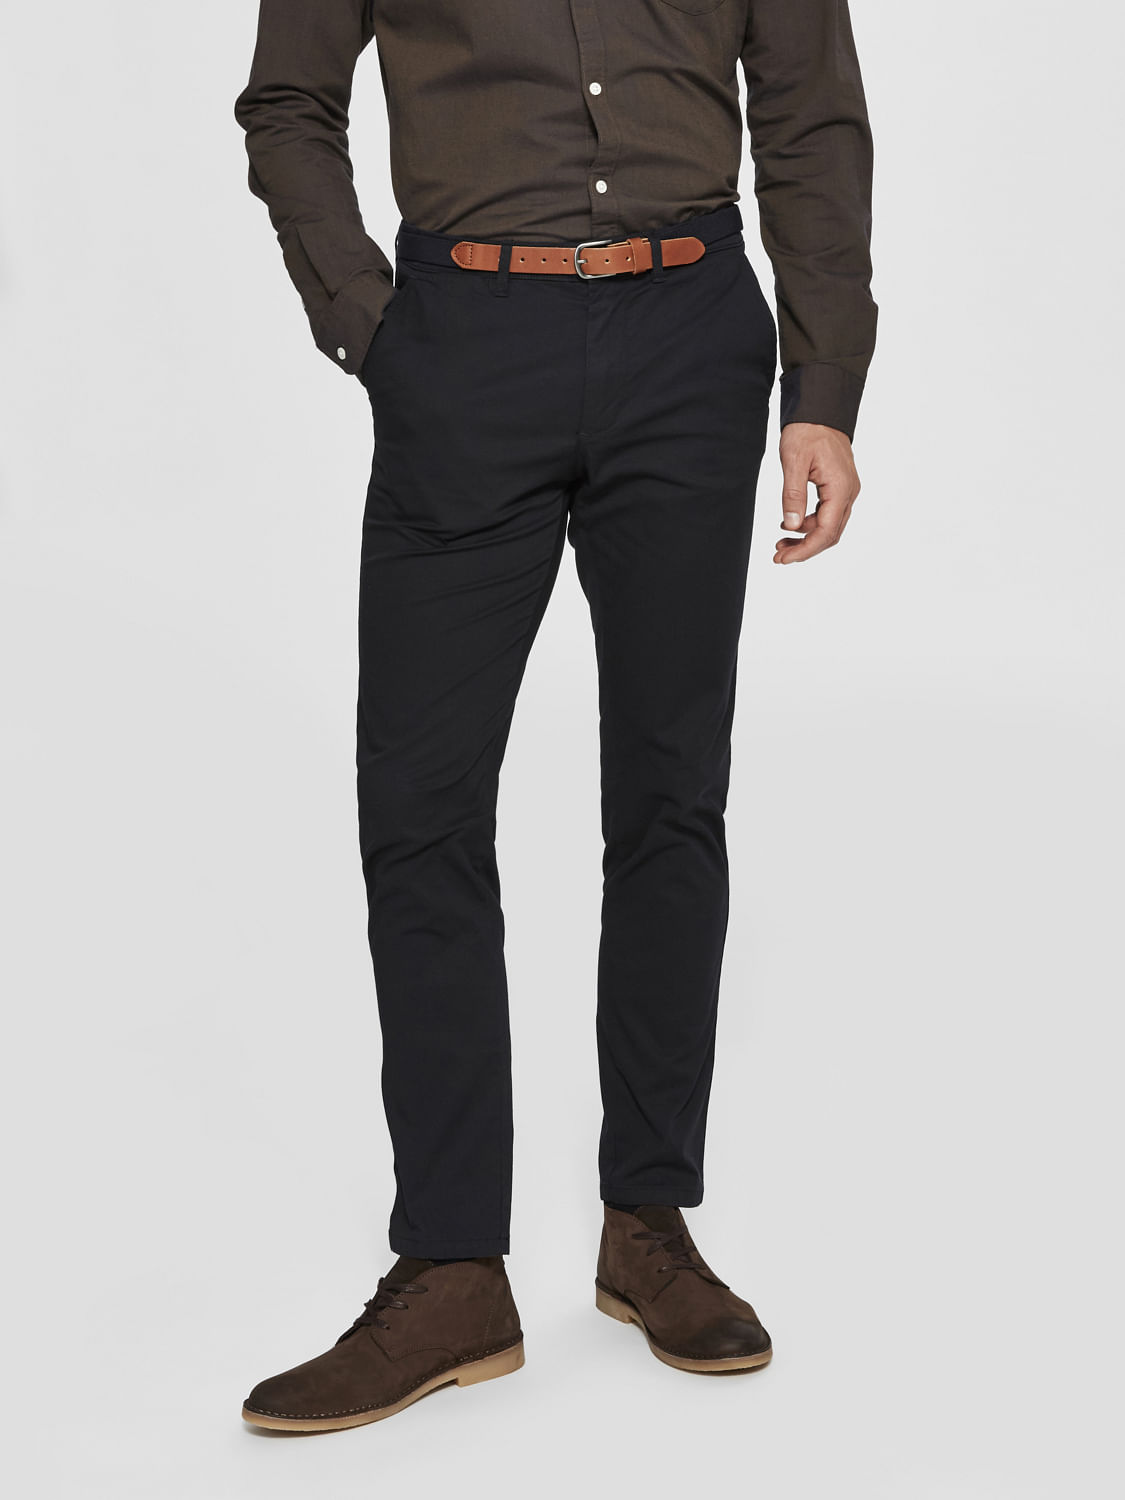 What To Wear With Black Chinos  Mens Black Chino Outfit Ideas  Michael 84